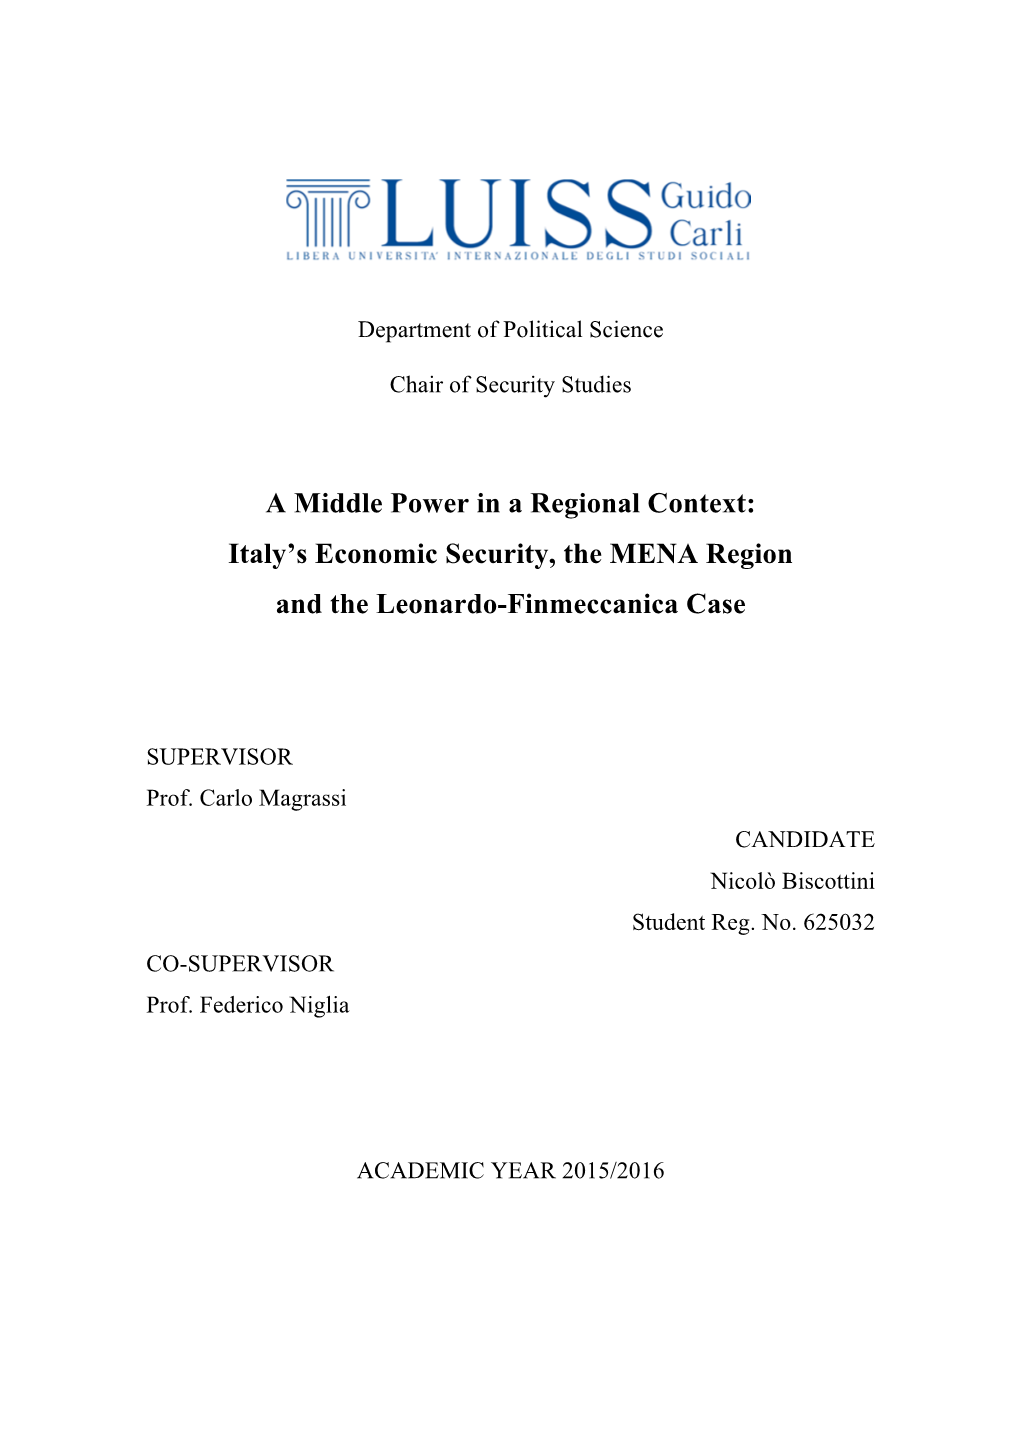 A Middle Power in a Regional Context: Italy's Economic Security, The